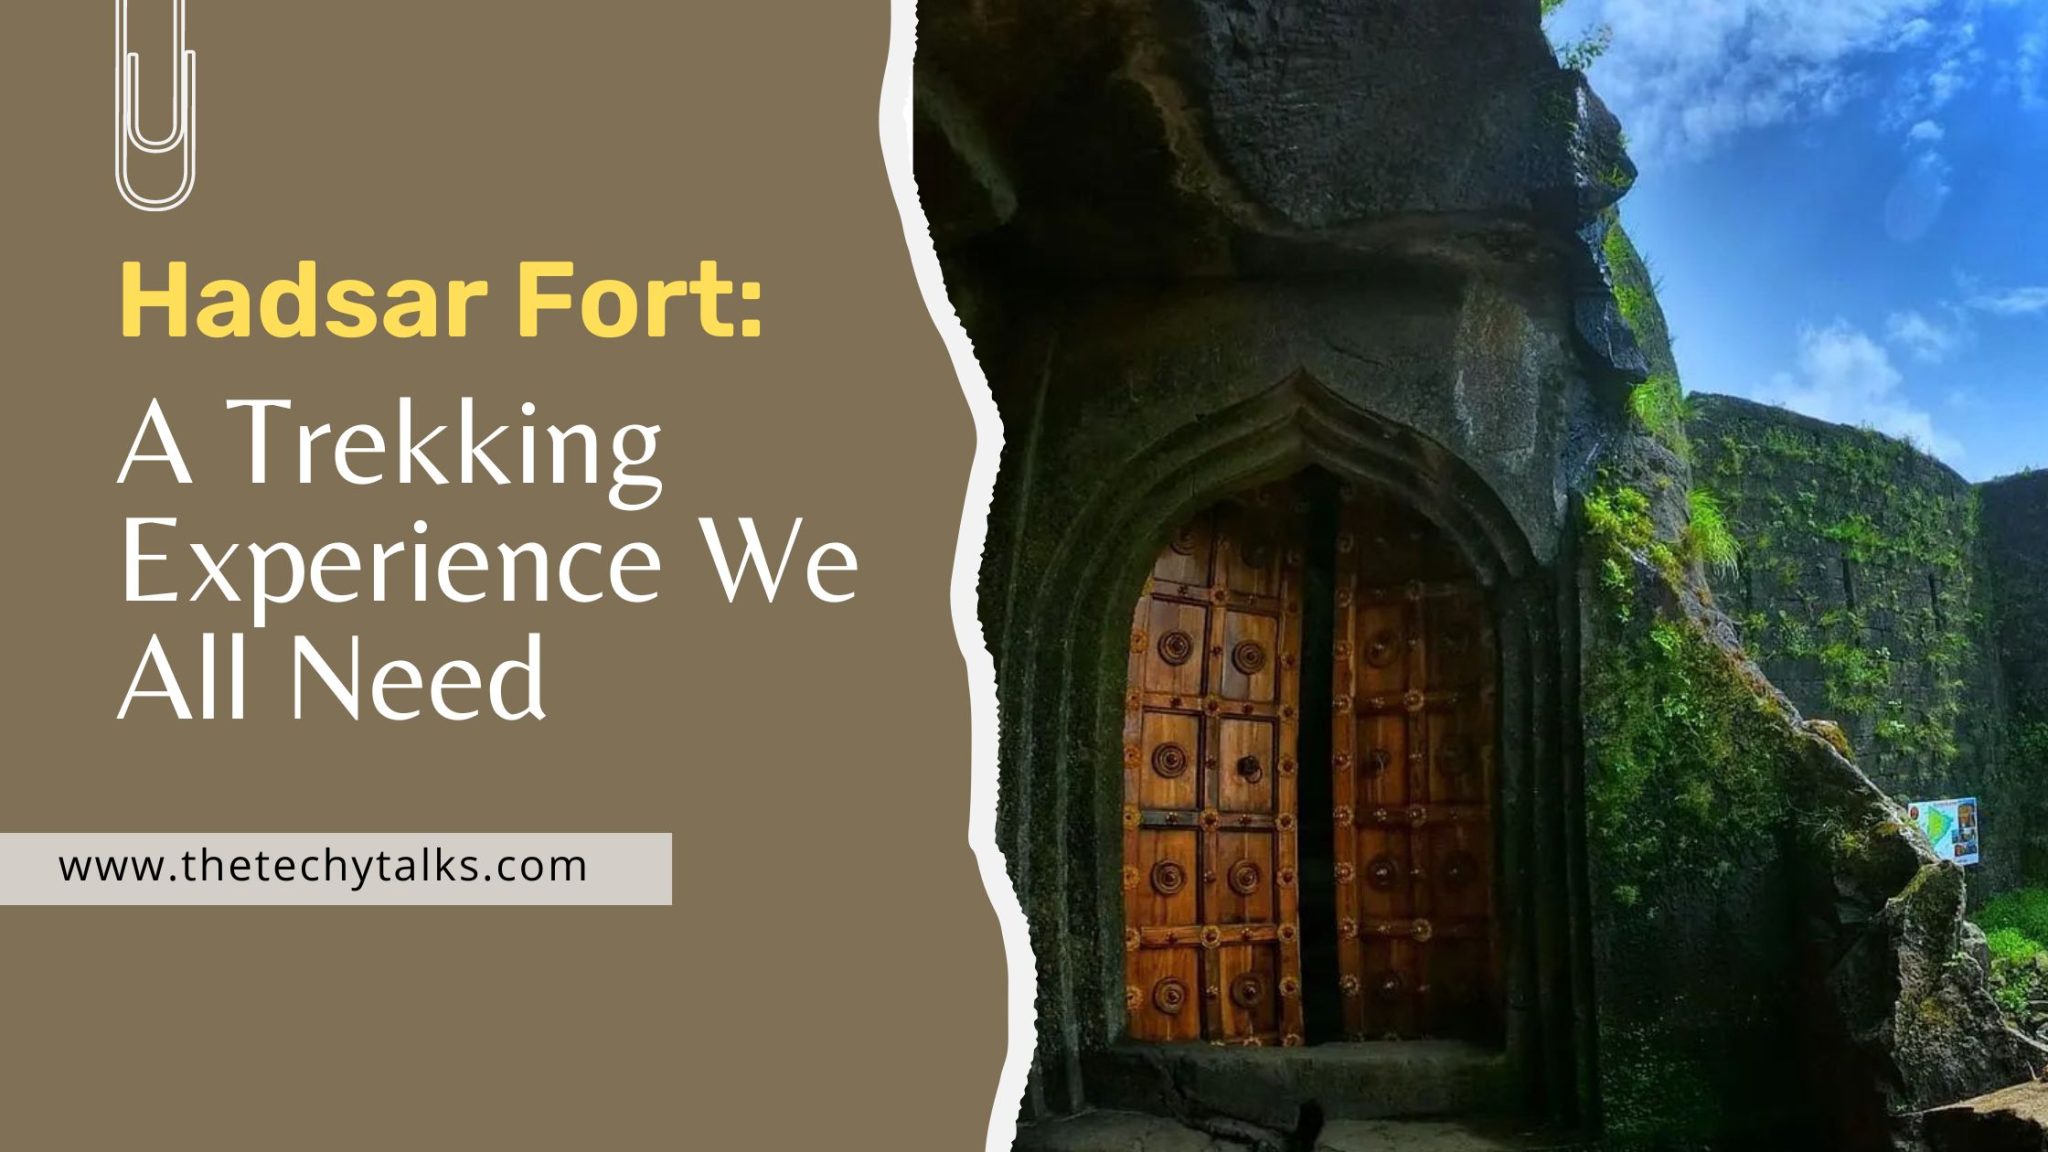 Hadsar Fort: A Trekking Experience We All Need